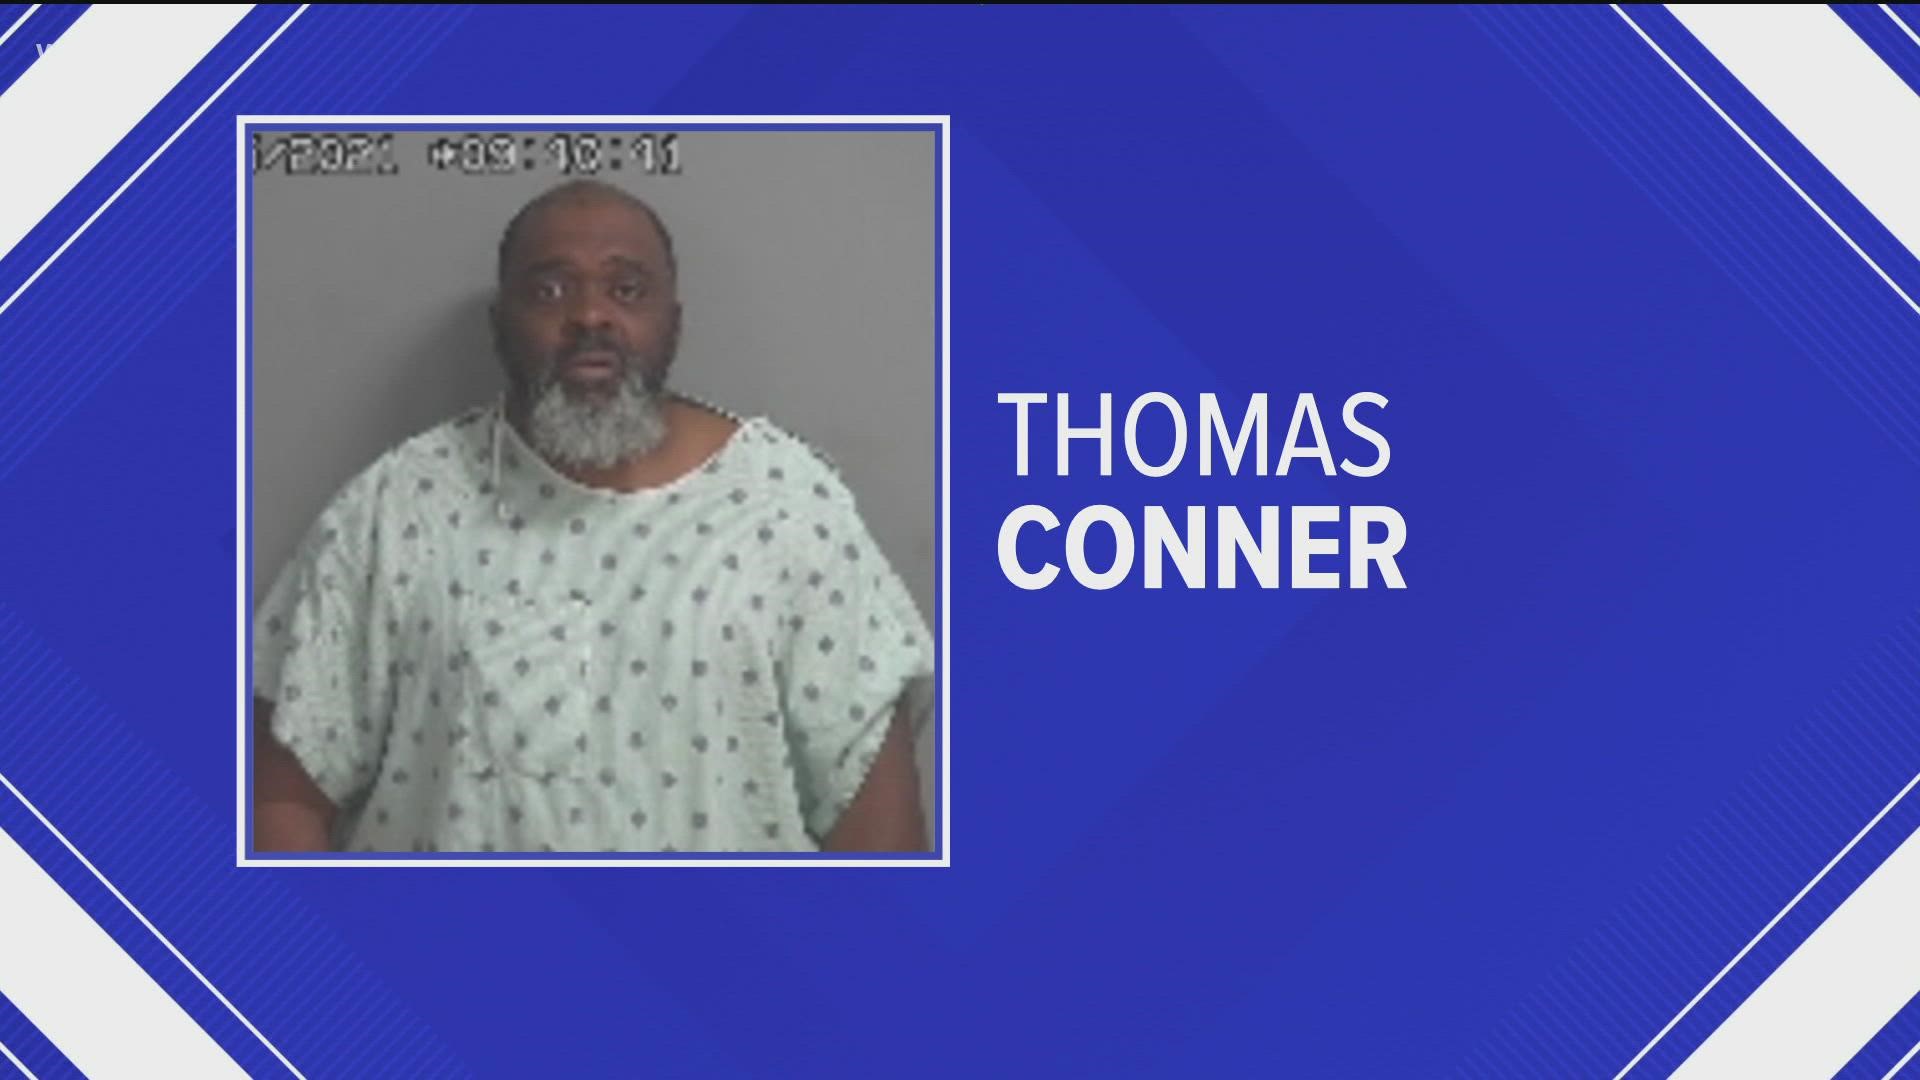 Thomas C. Conner, 51, was shot by a Sandusky County sheriff's deputy during the standoff situation Oct. 18.